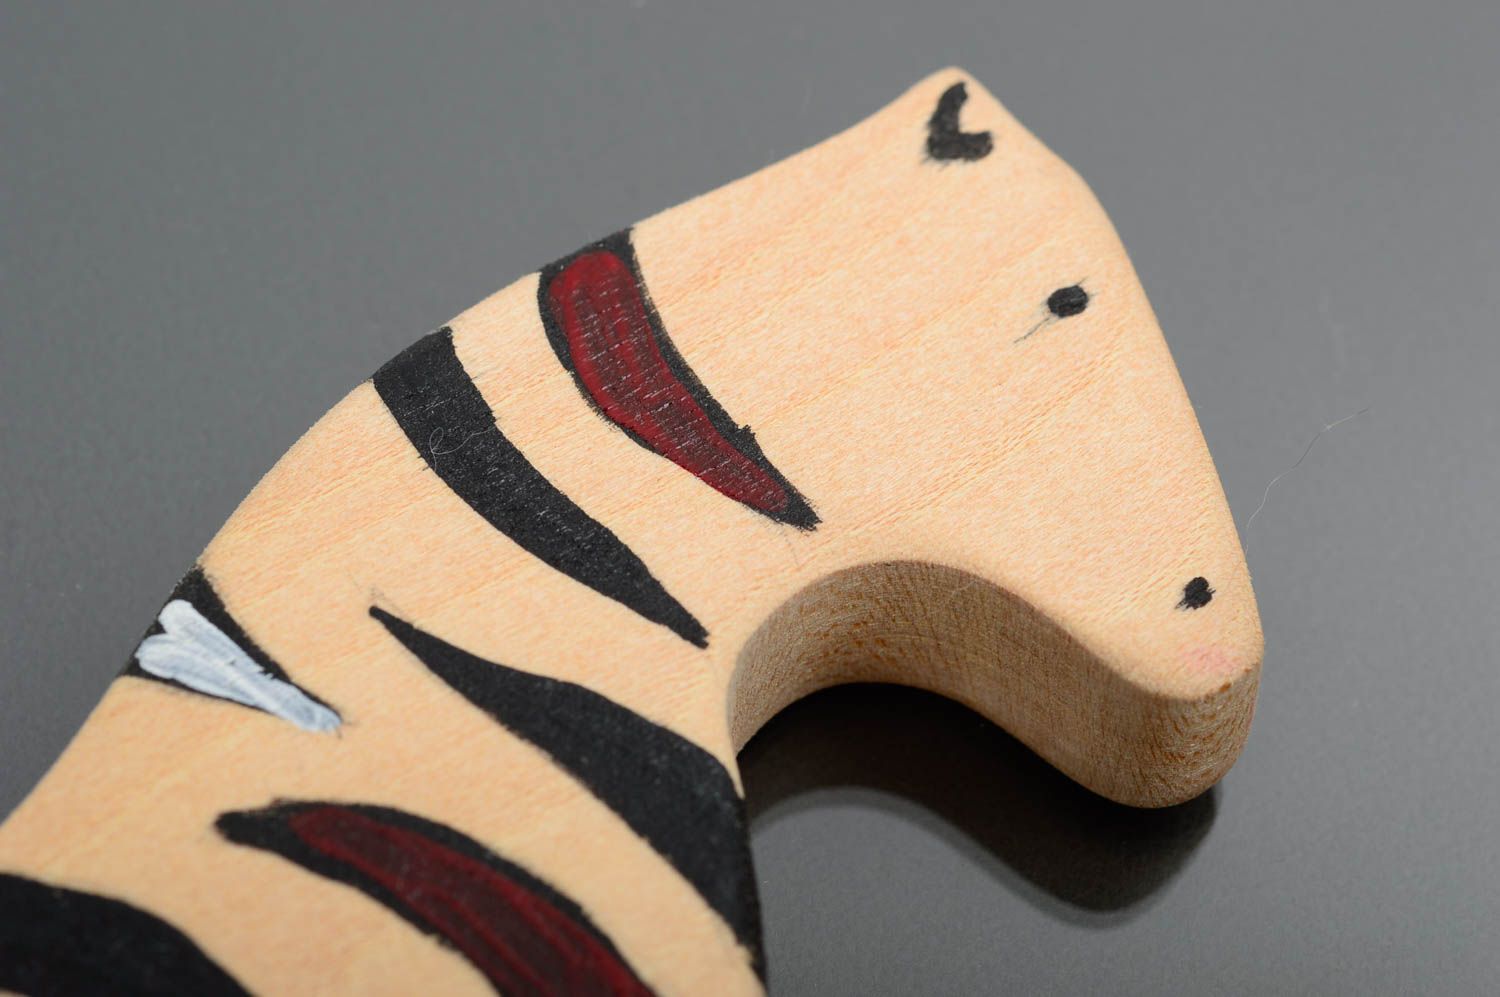 Wooden toy handmade toy home decor gift ideas for kids animal toys table decor photo 3